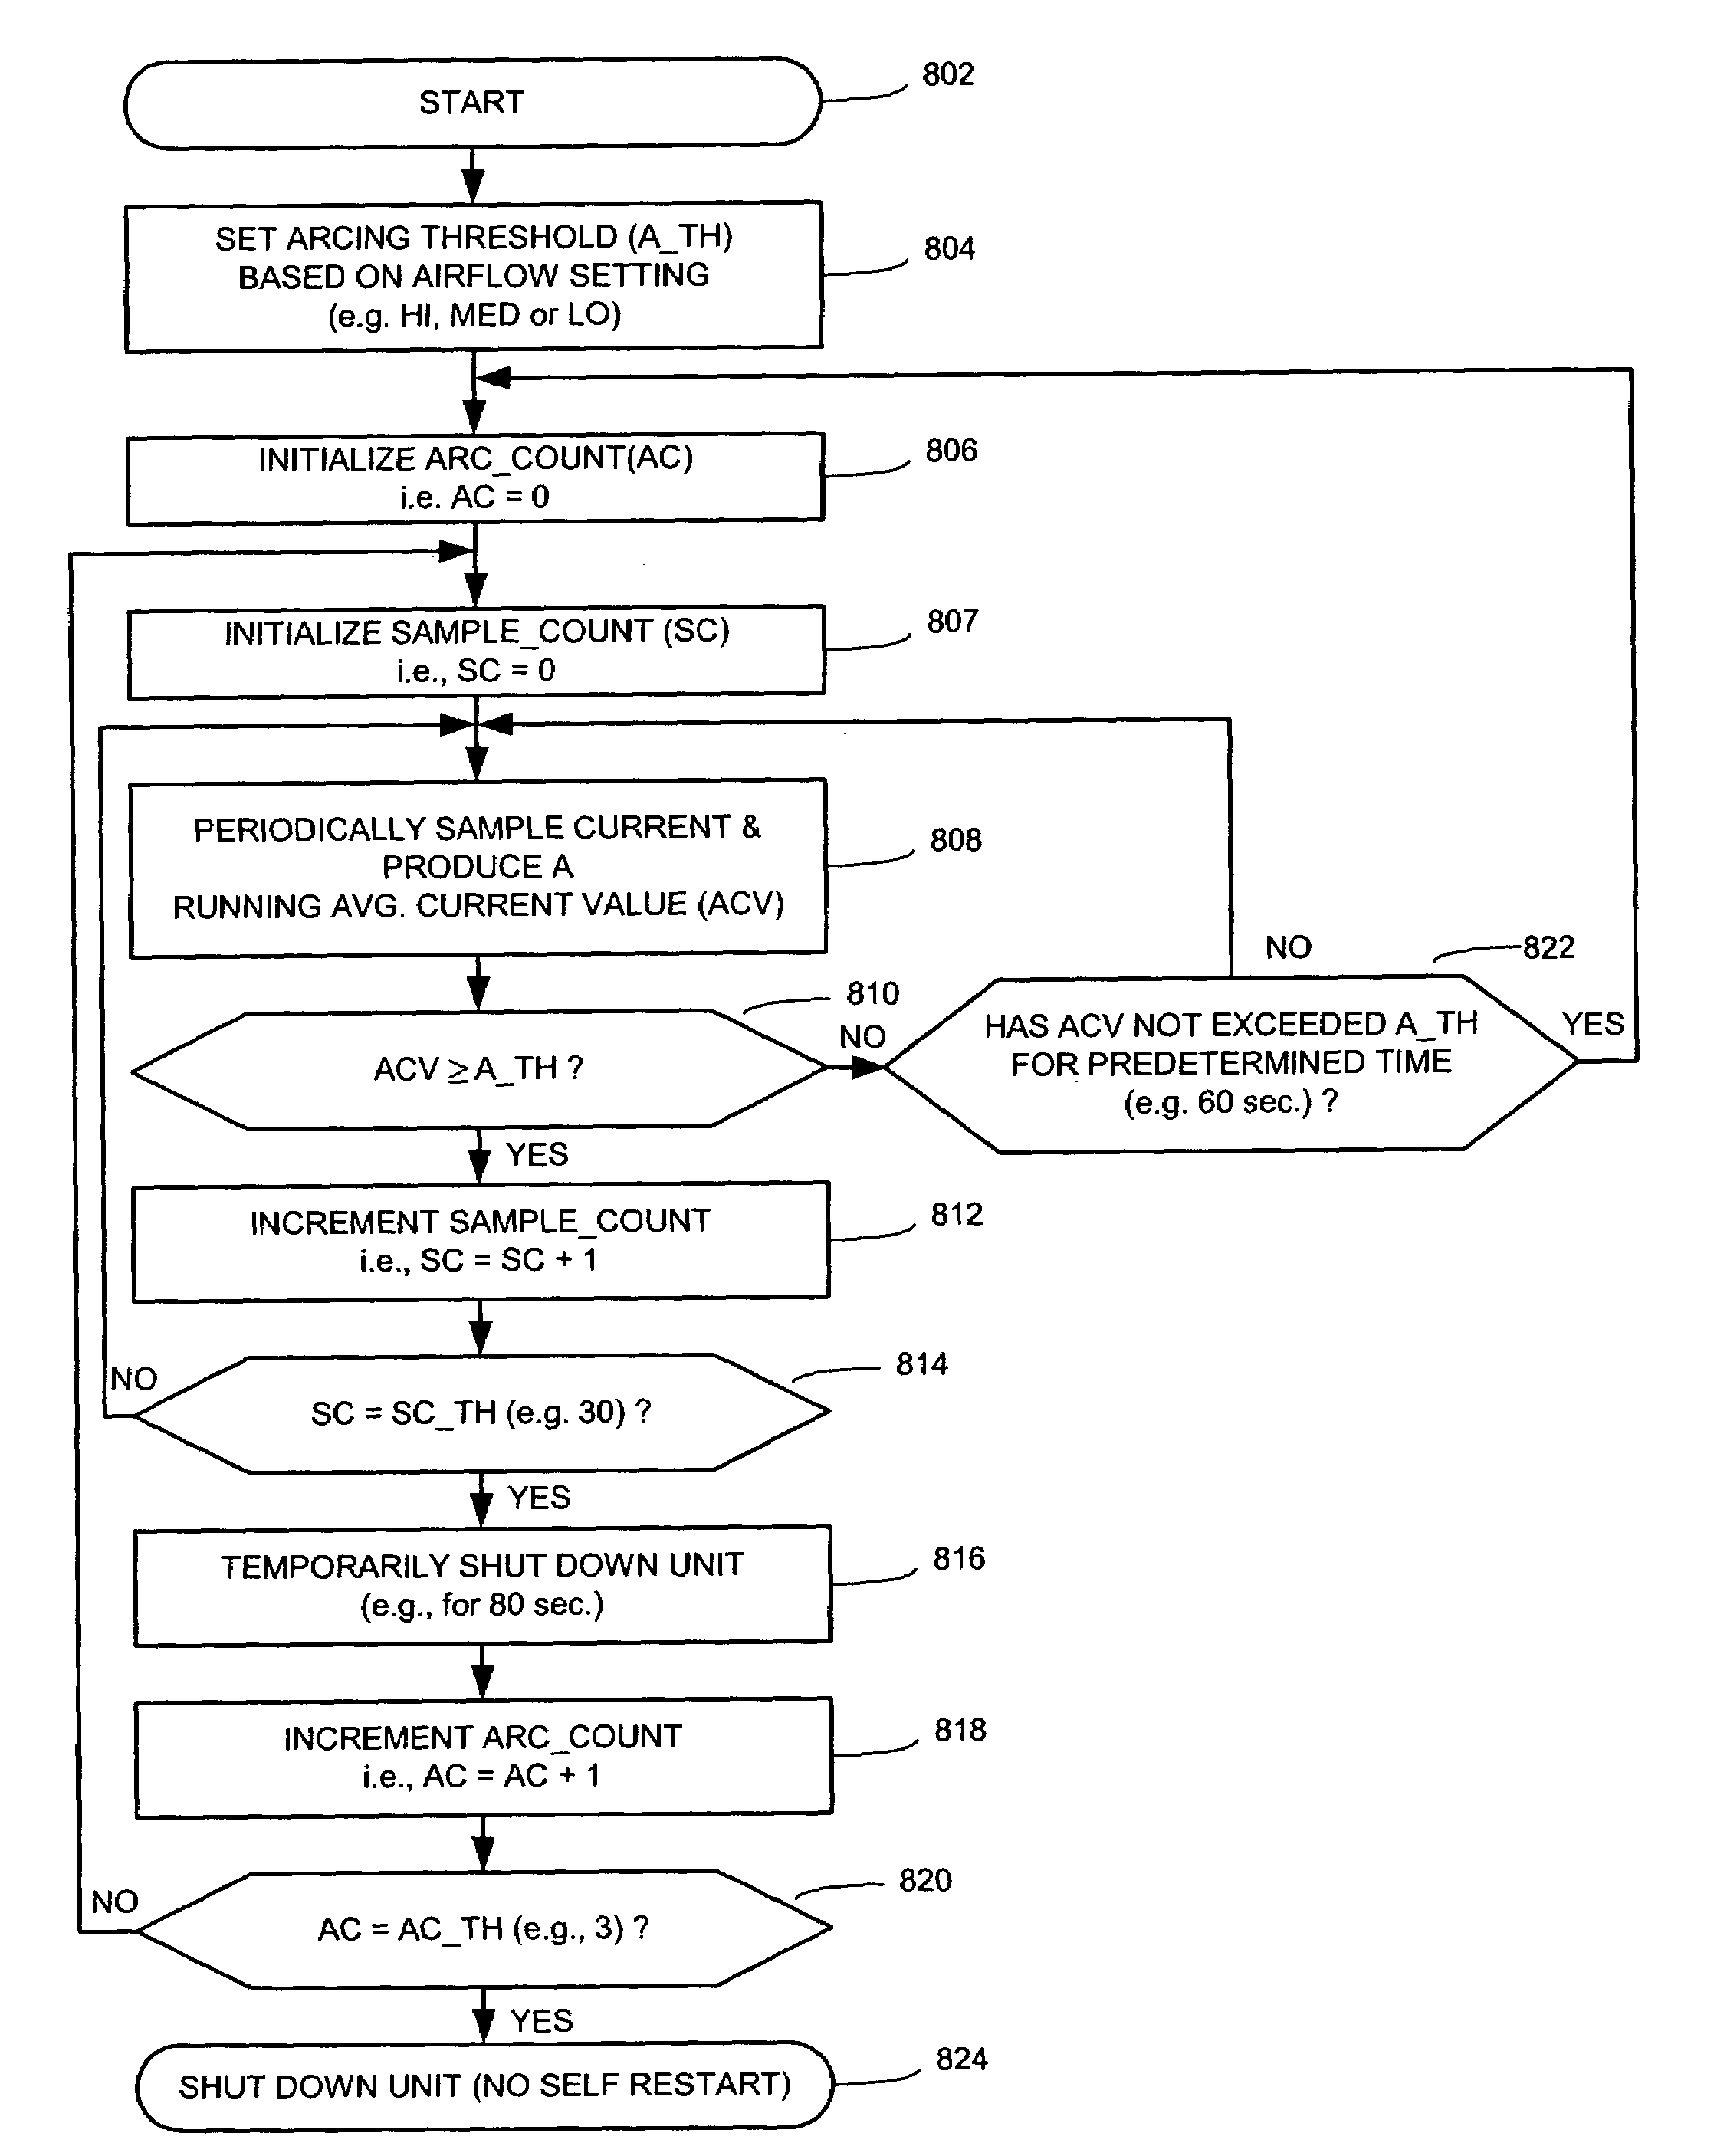 Electro-kinetic air transporter and conditioner devices with enhanced arching detection and suppression features